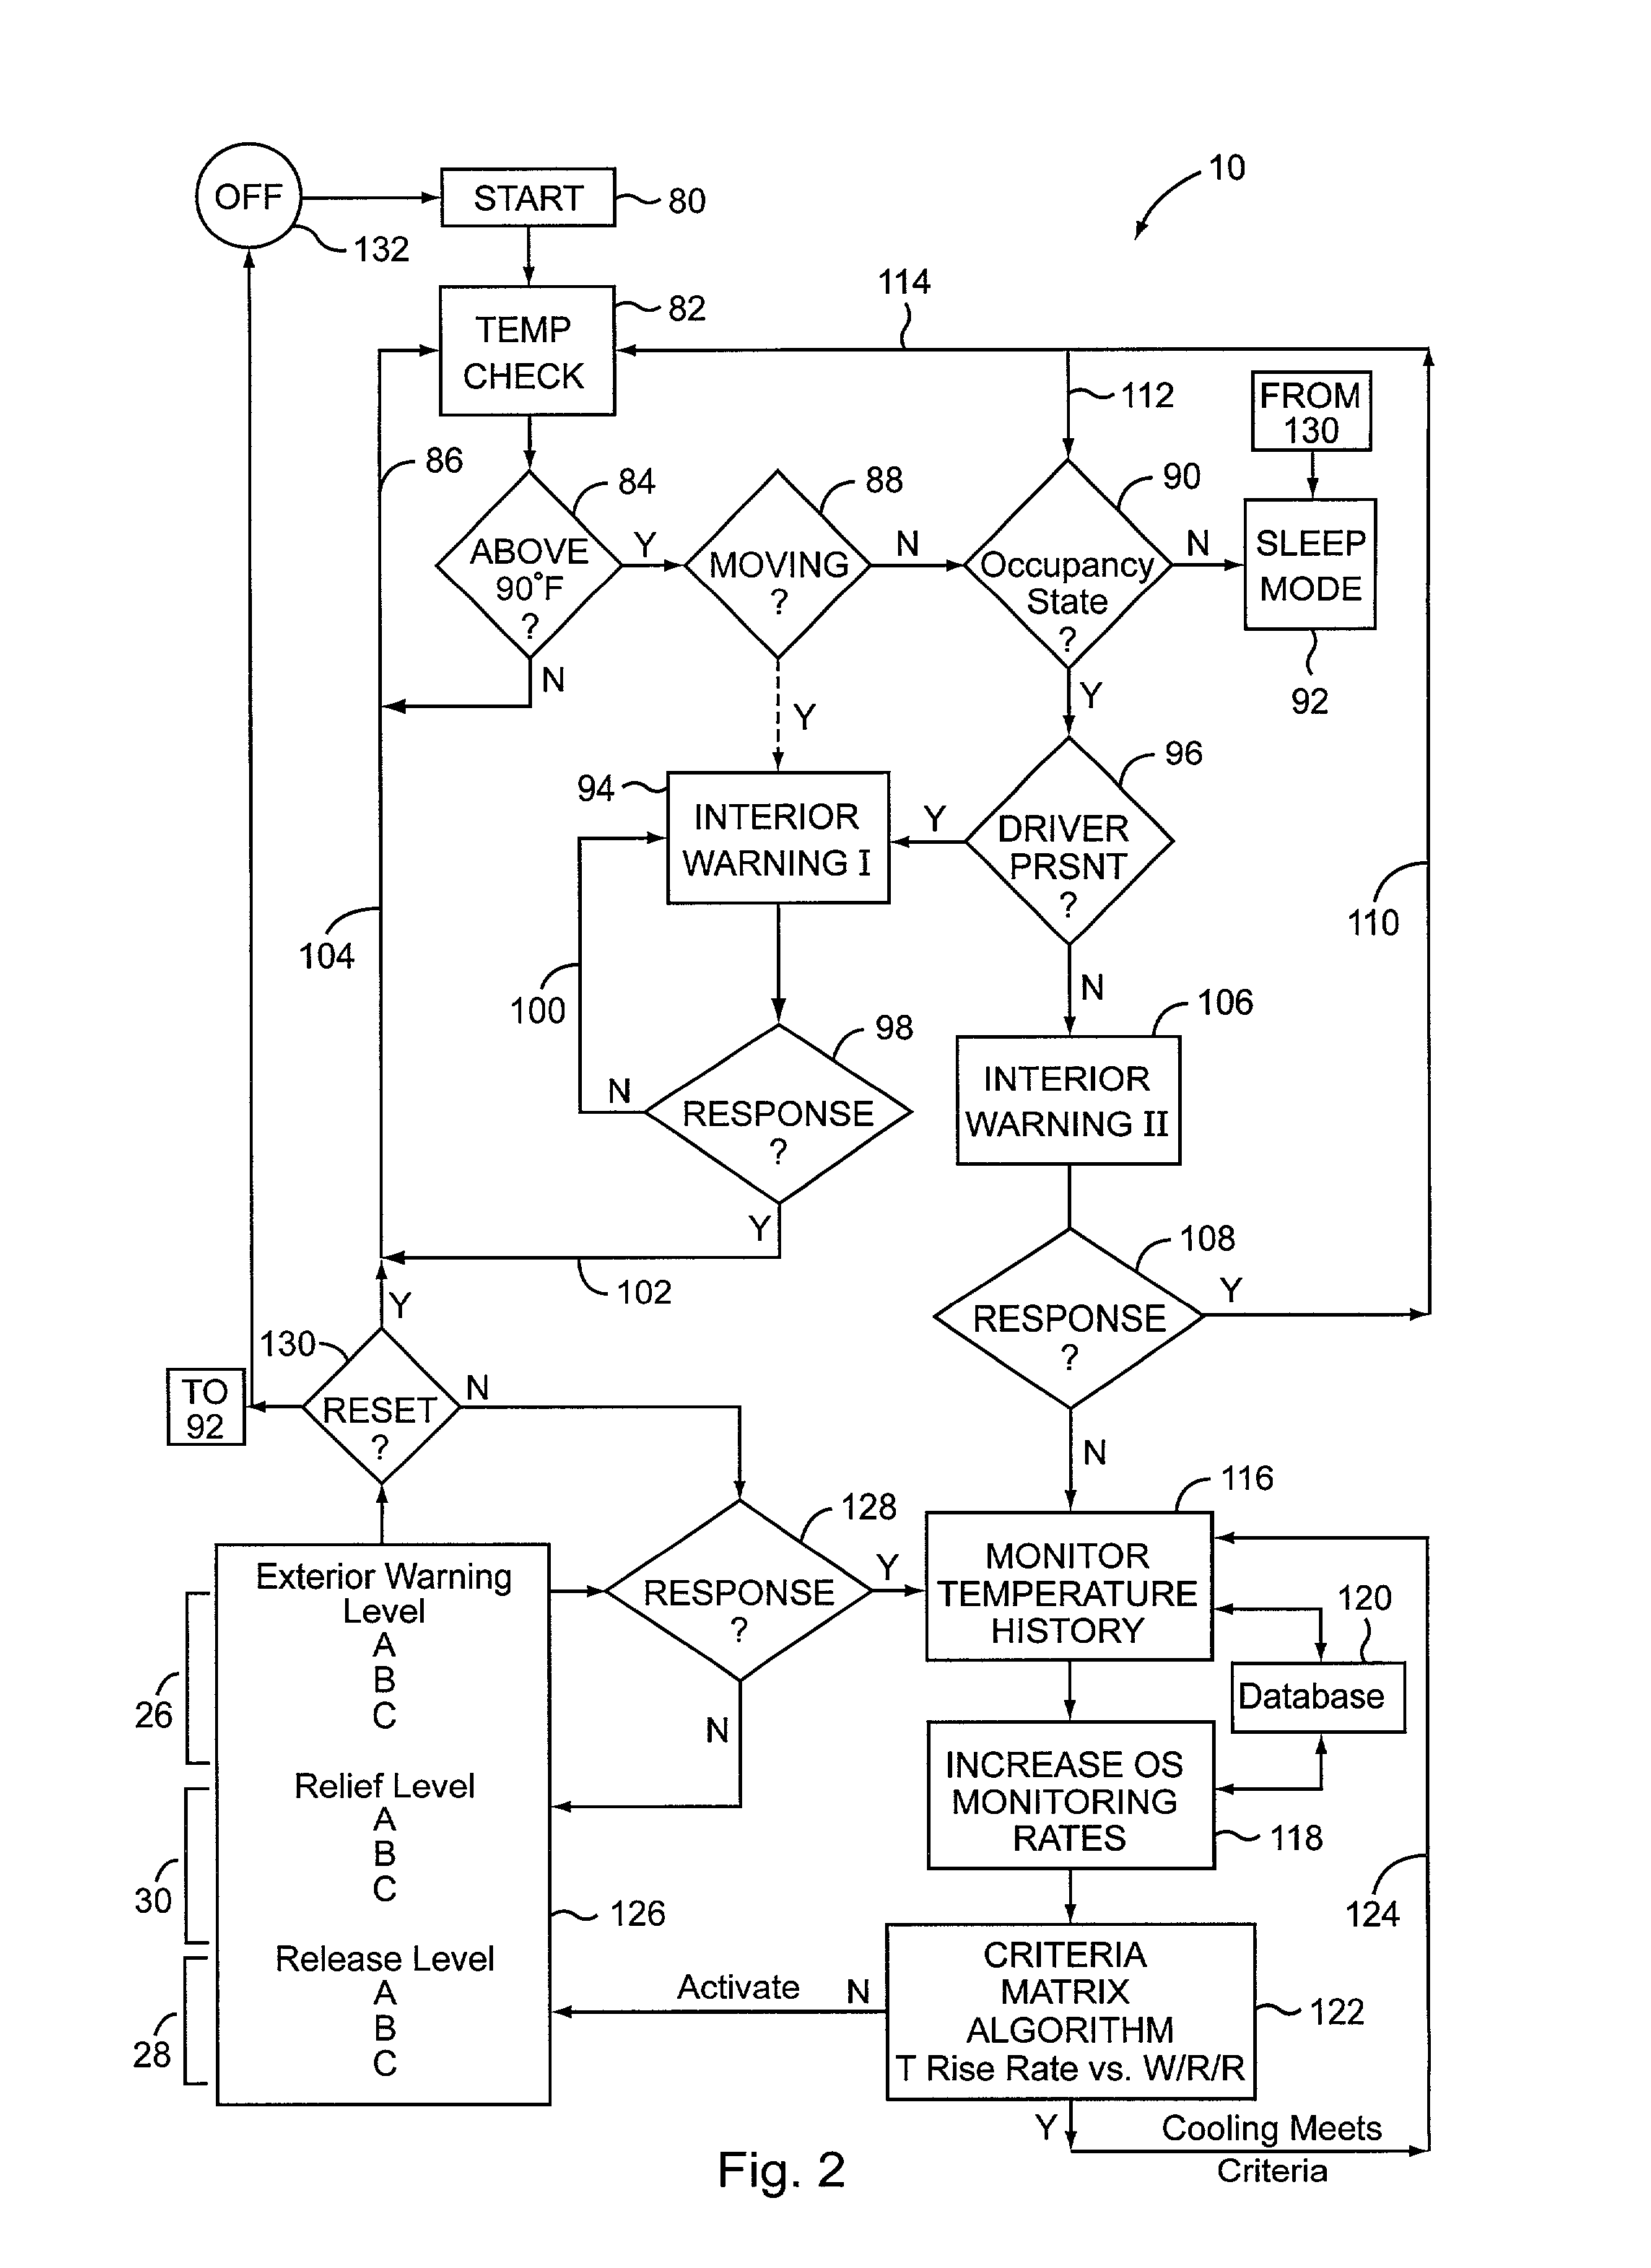 Hot vehicle safety system and methods of preventing passenger entrapment and heat suffocation